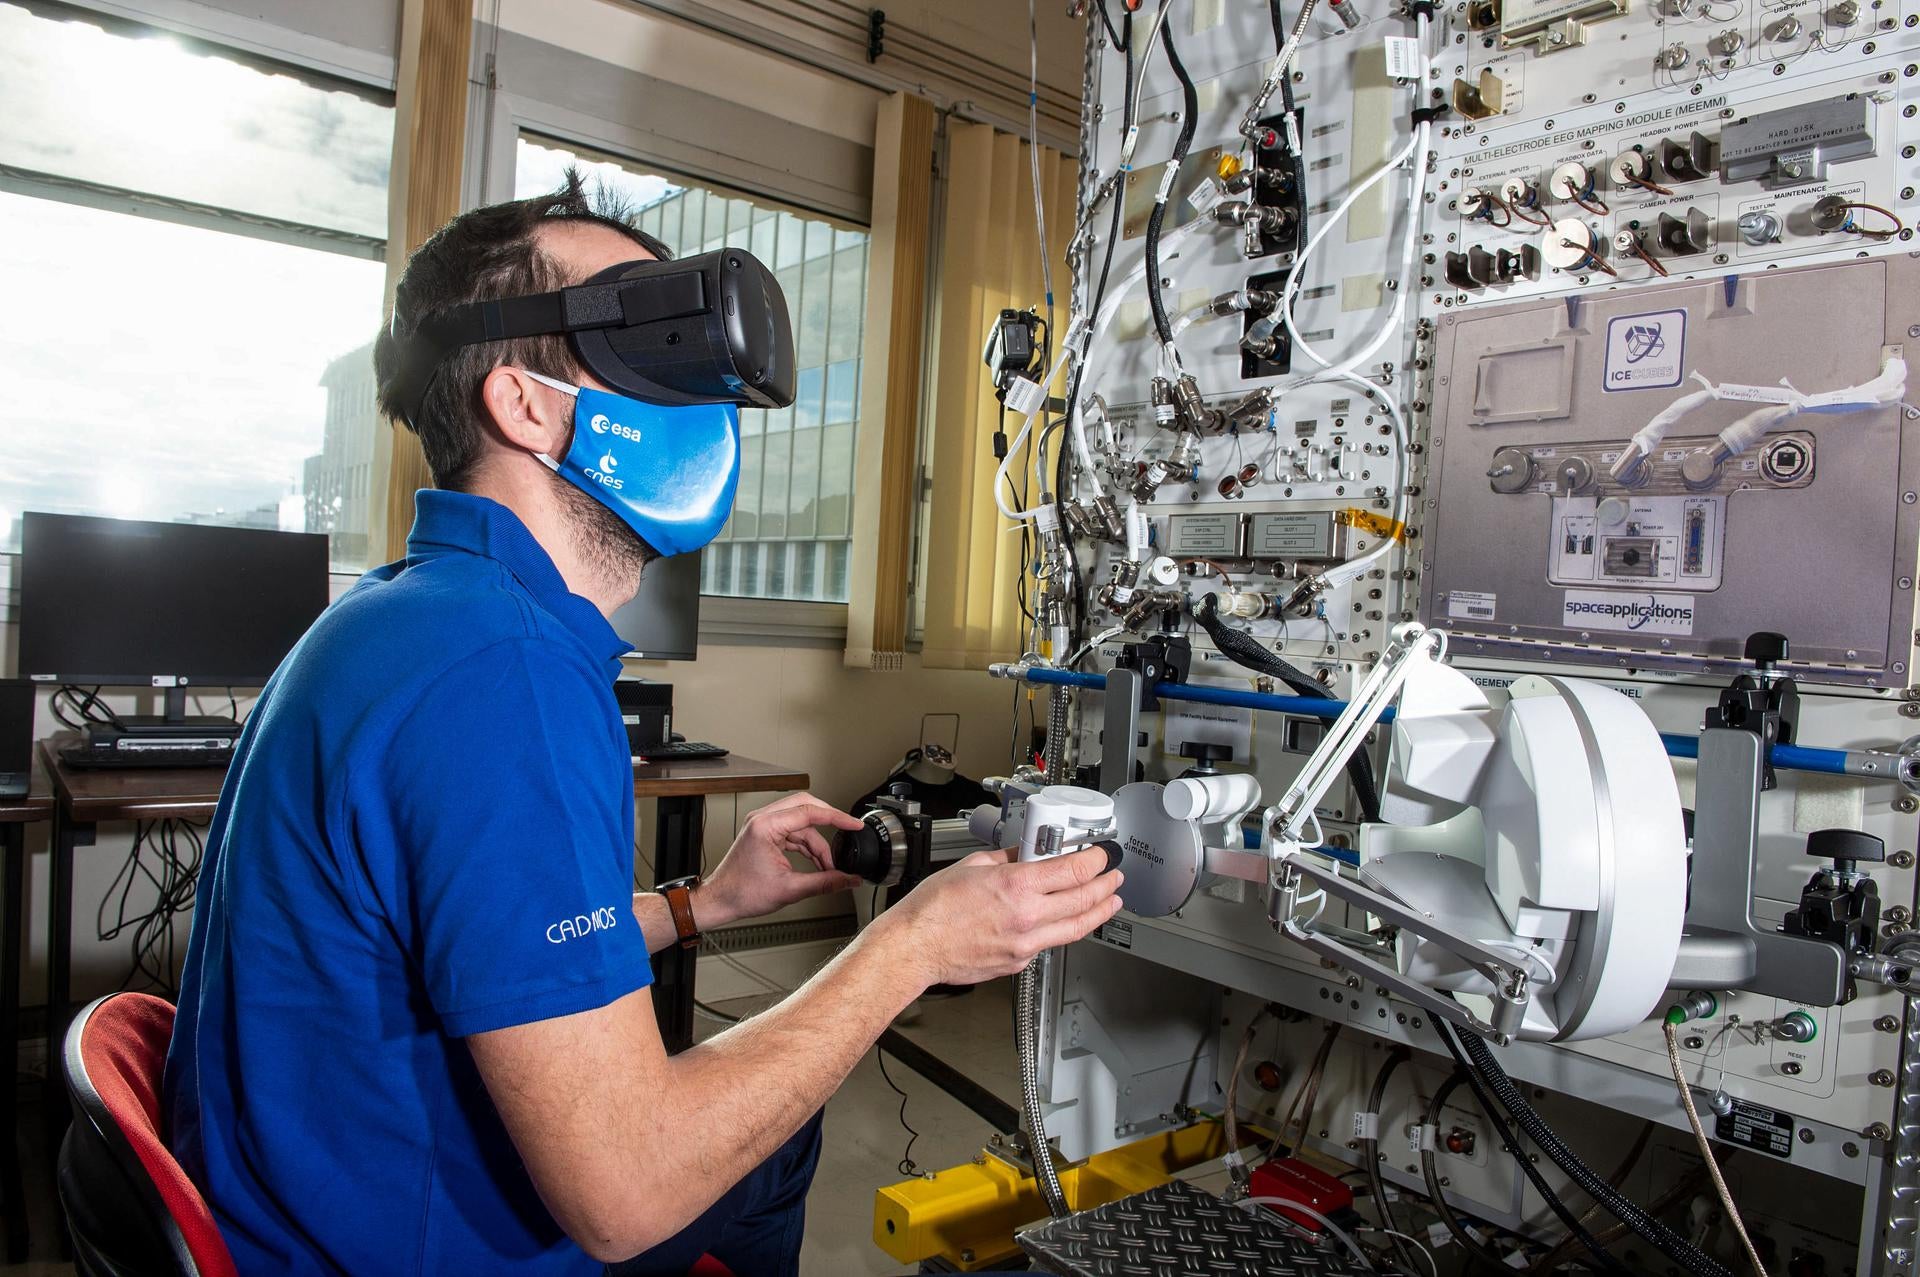 The Pilote VR system being tested on the ground.  (Image: CNES/GRIMAULT Emmanuel)